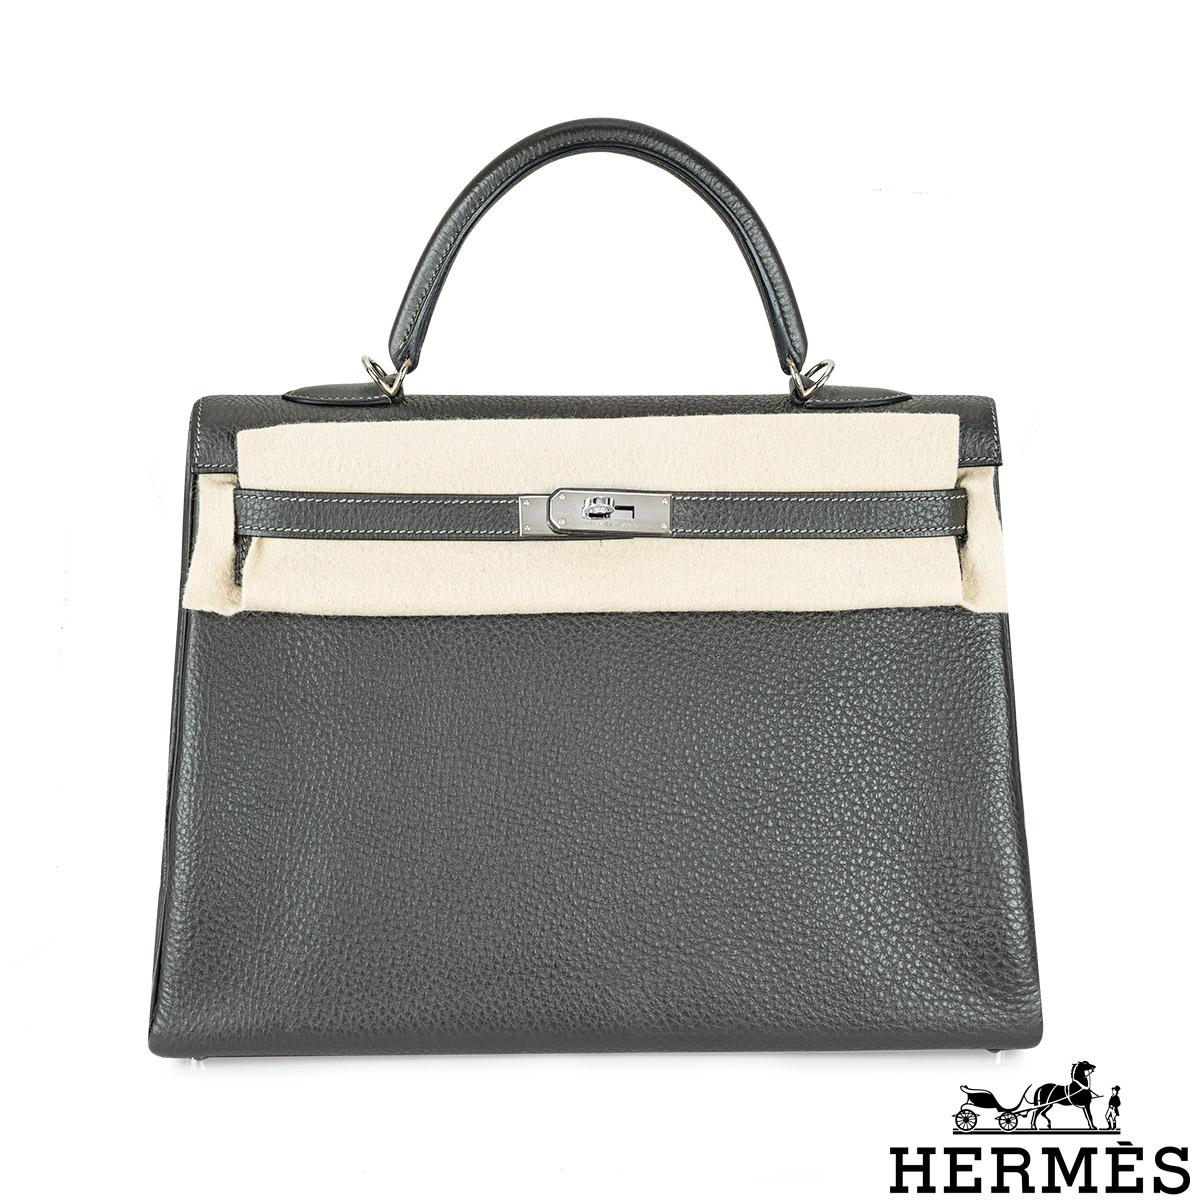 A lovely Hermès Kelly II Retourne 35cm bag. The exterior of this Kelly is crafted in Graphite Veau Taurillon Clemence leather and is detailed with palladium hardware. It features a front toggle closure, a single rolled top handle and tonal